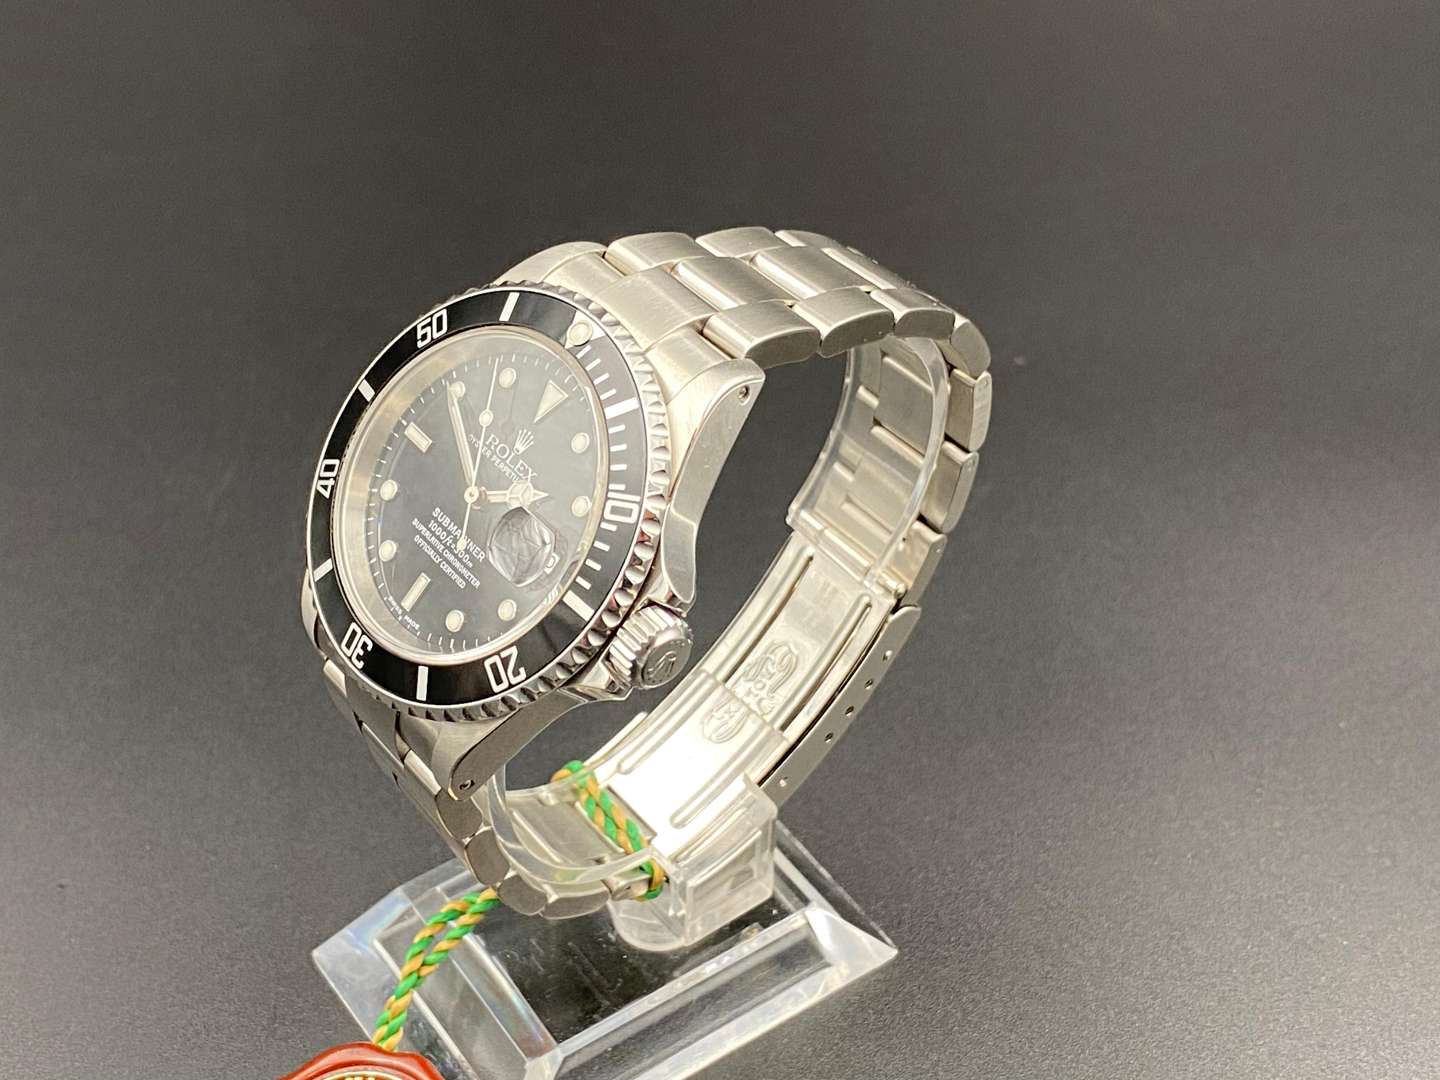 <p>ROLEX, “Submariner”, stainless steel, automatic, centre seconds, calendar wristwatch. Ref 16610, Serial Number P575641, 2000.</p>